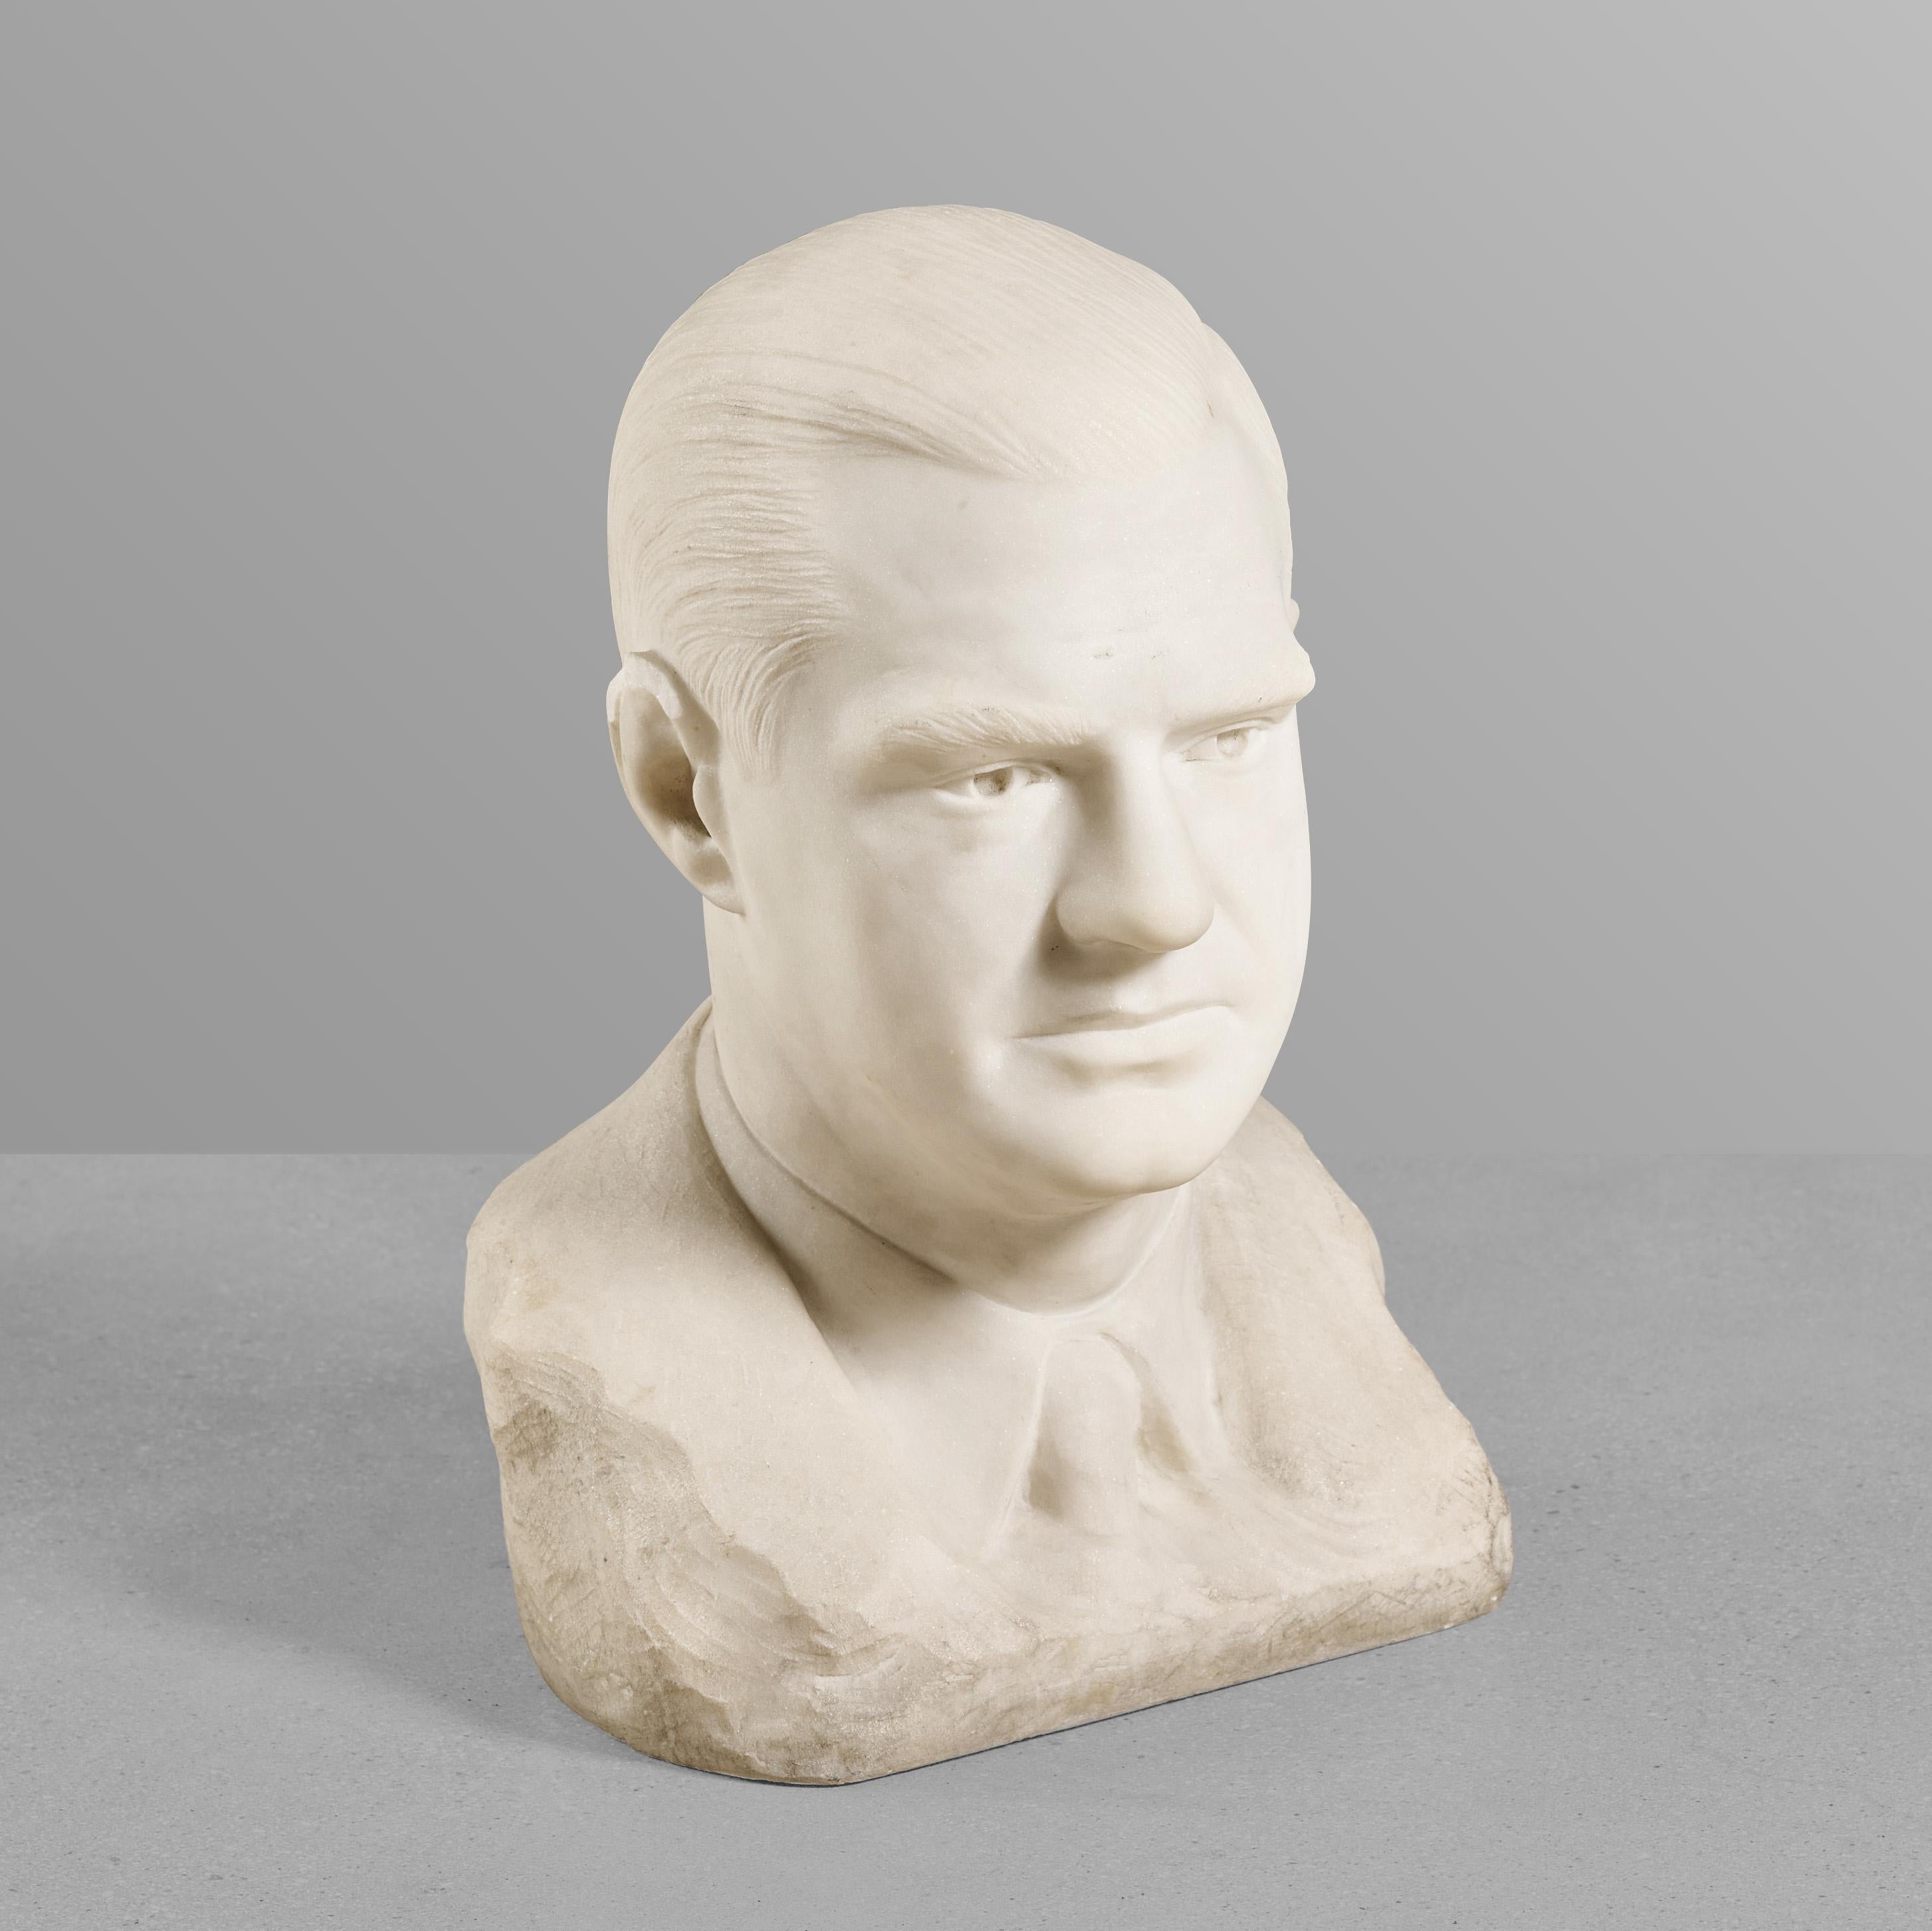 Carrara / statuary marble bust of important dude. Great quality. Incredibly well carved.